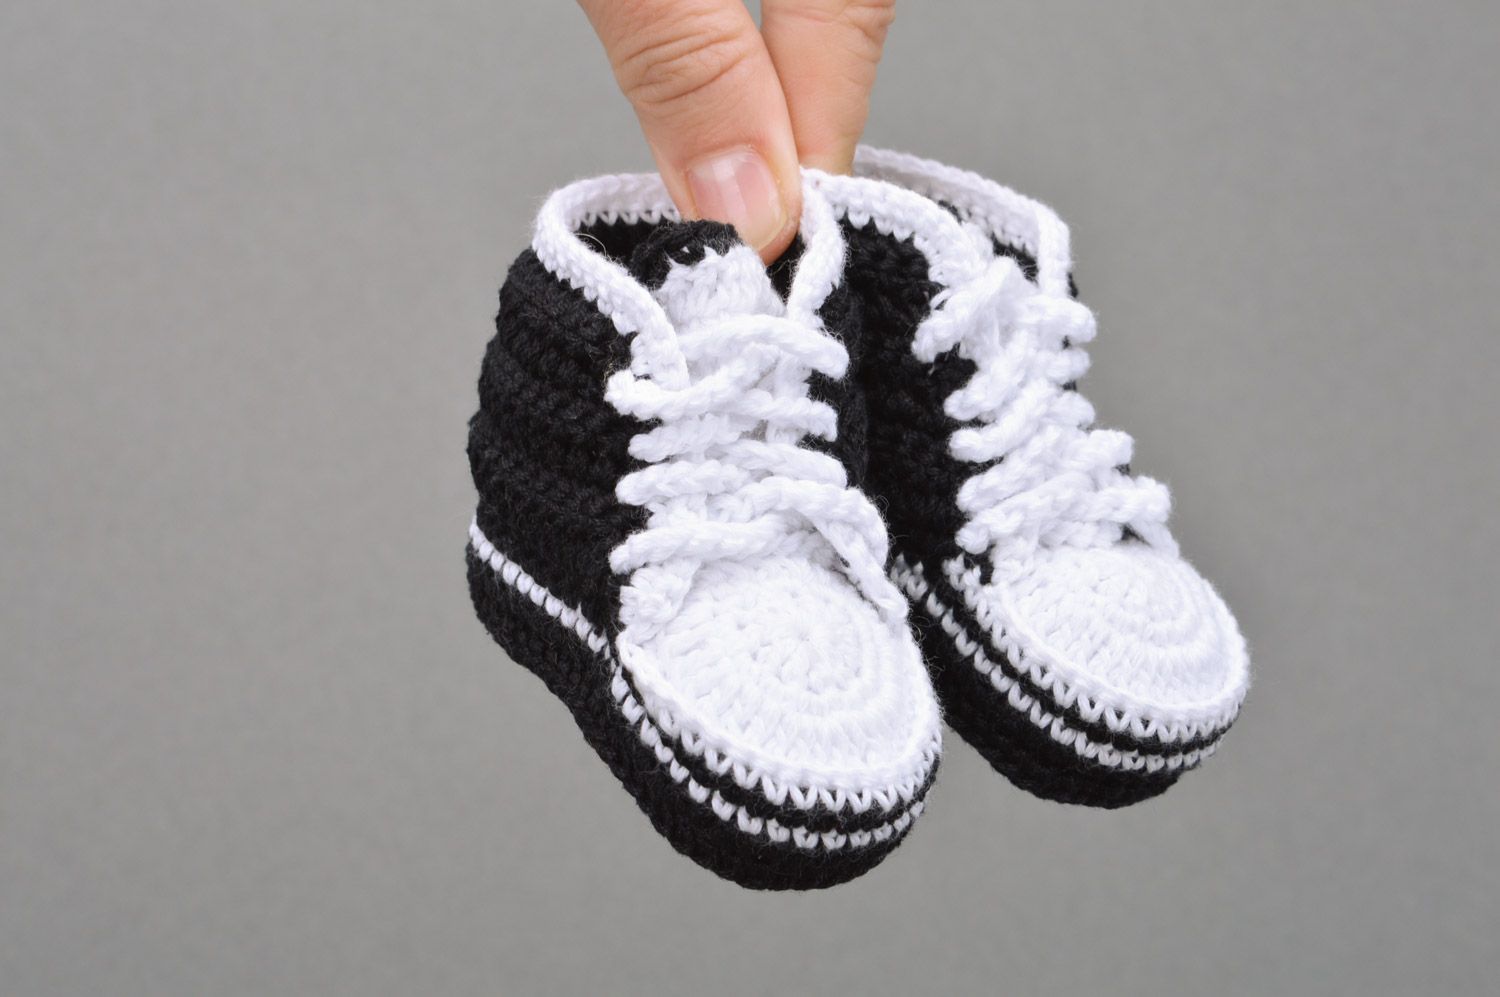 Handmade crochet baby booties in black and white colors with shoelaces photo 3